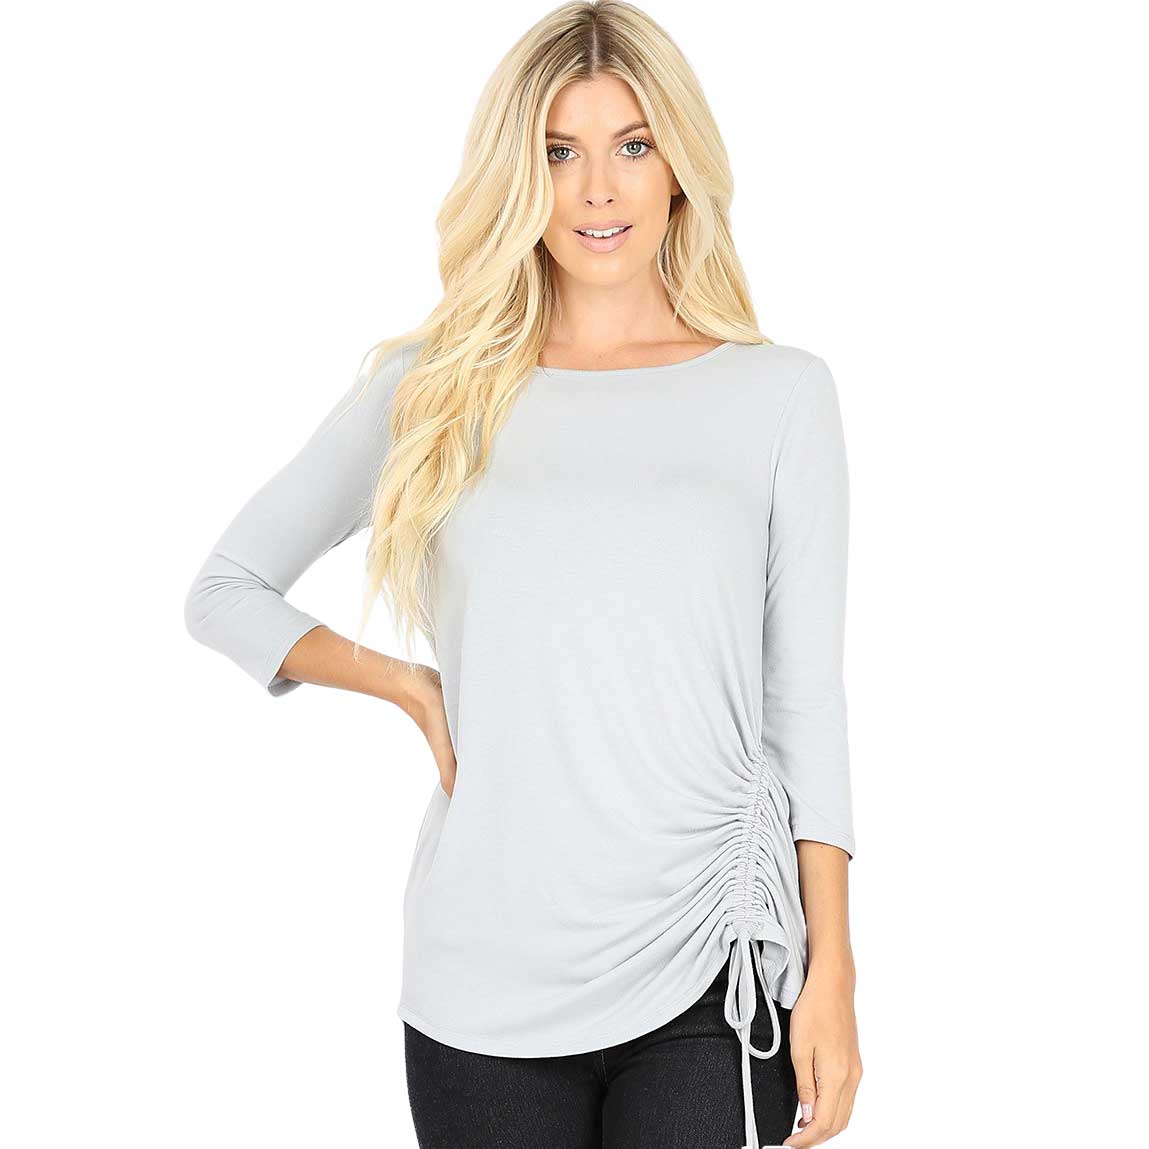 1887 - 3/4 Sleeve Ruched Tops LIGHT GREY 3/4 Sleeve Round Neck Side Ruched 1887 - Medium